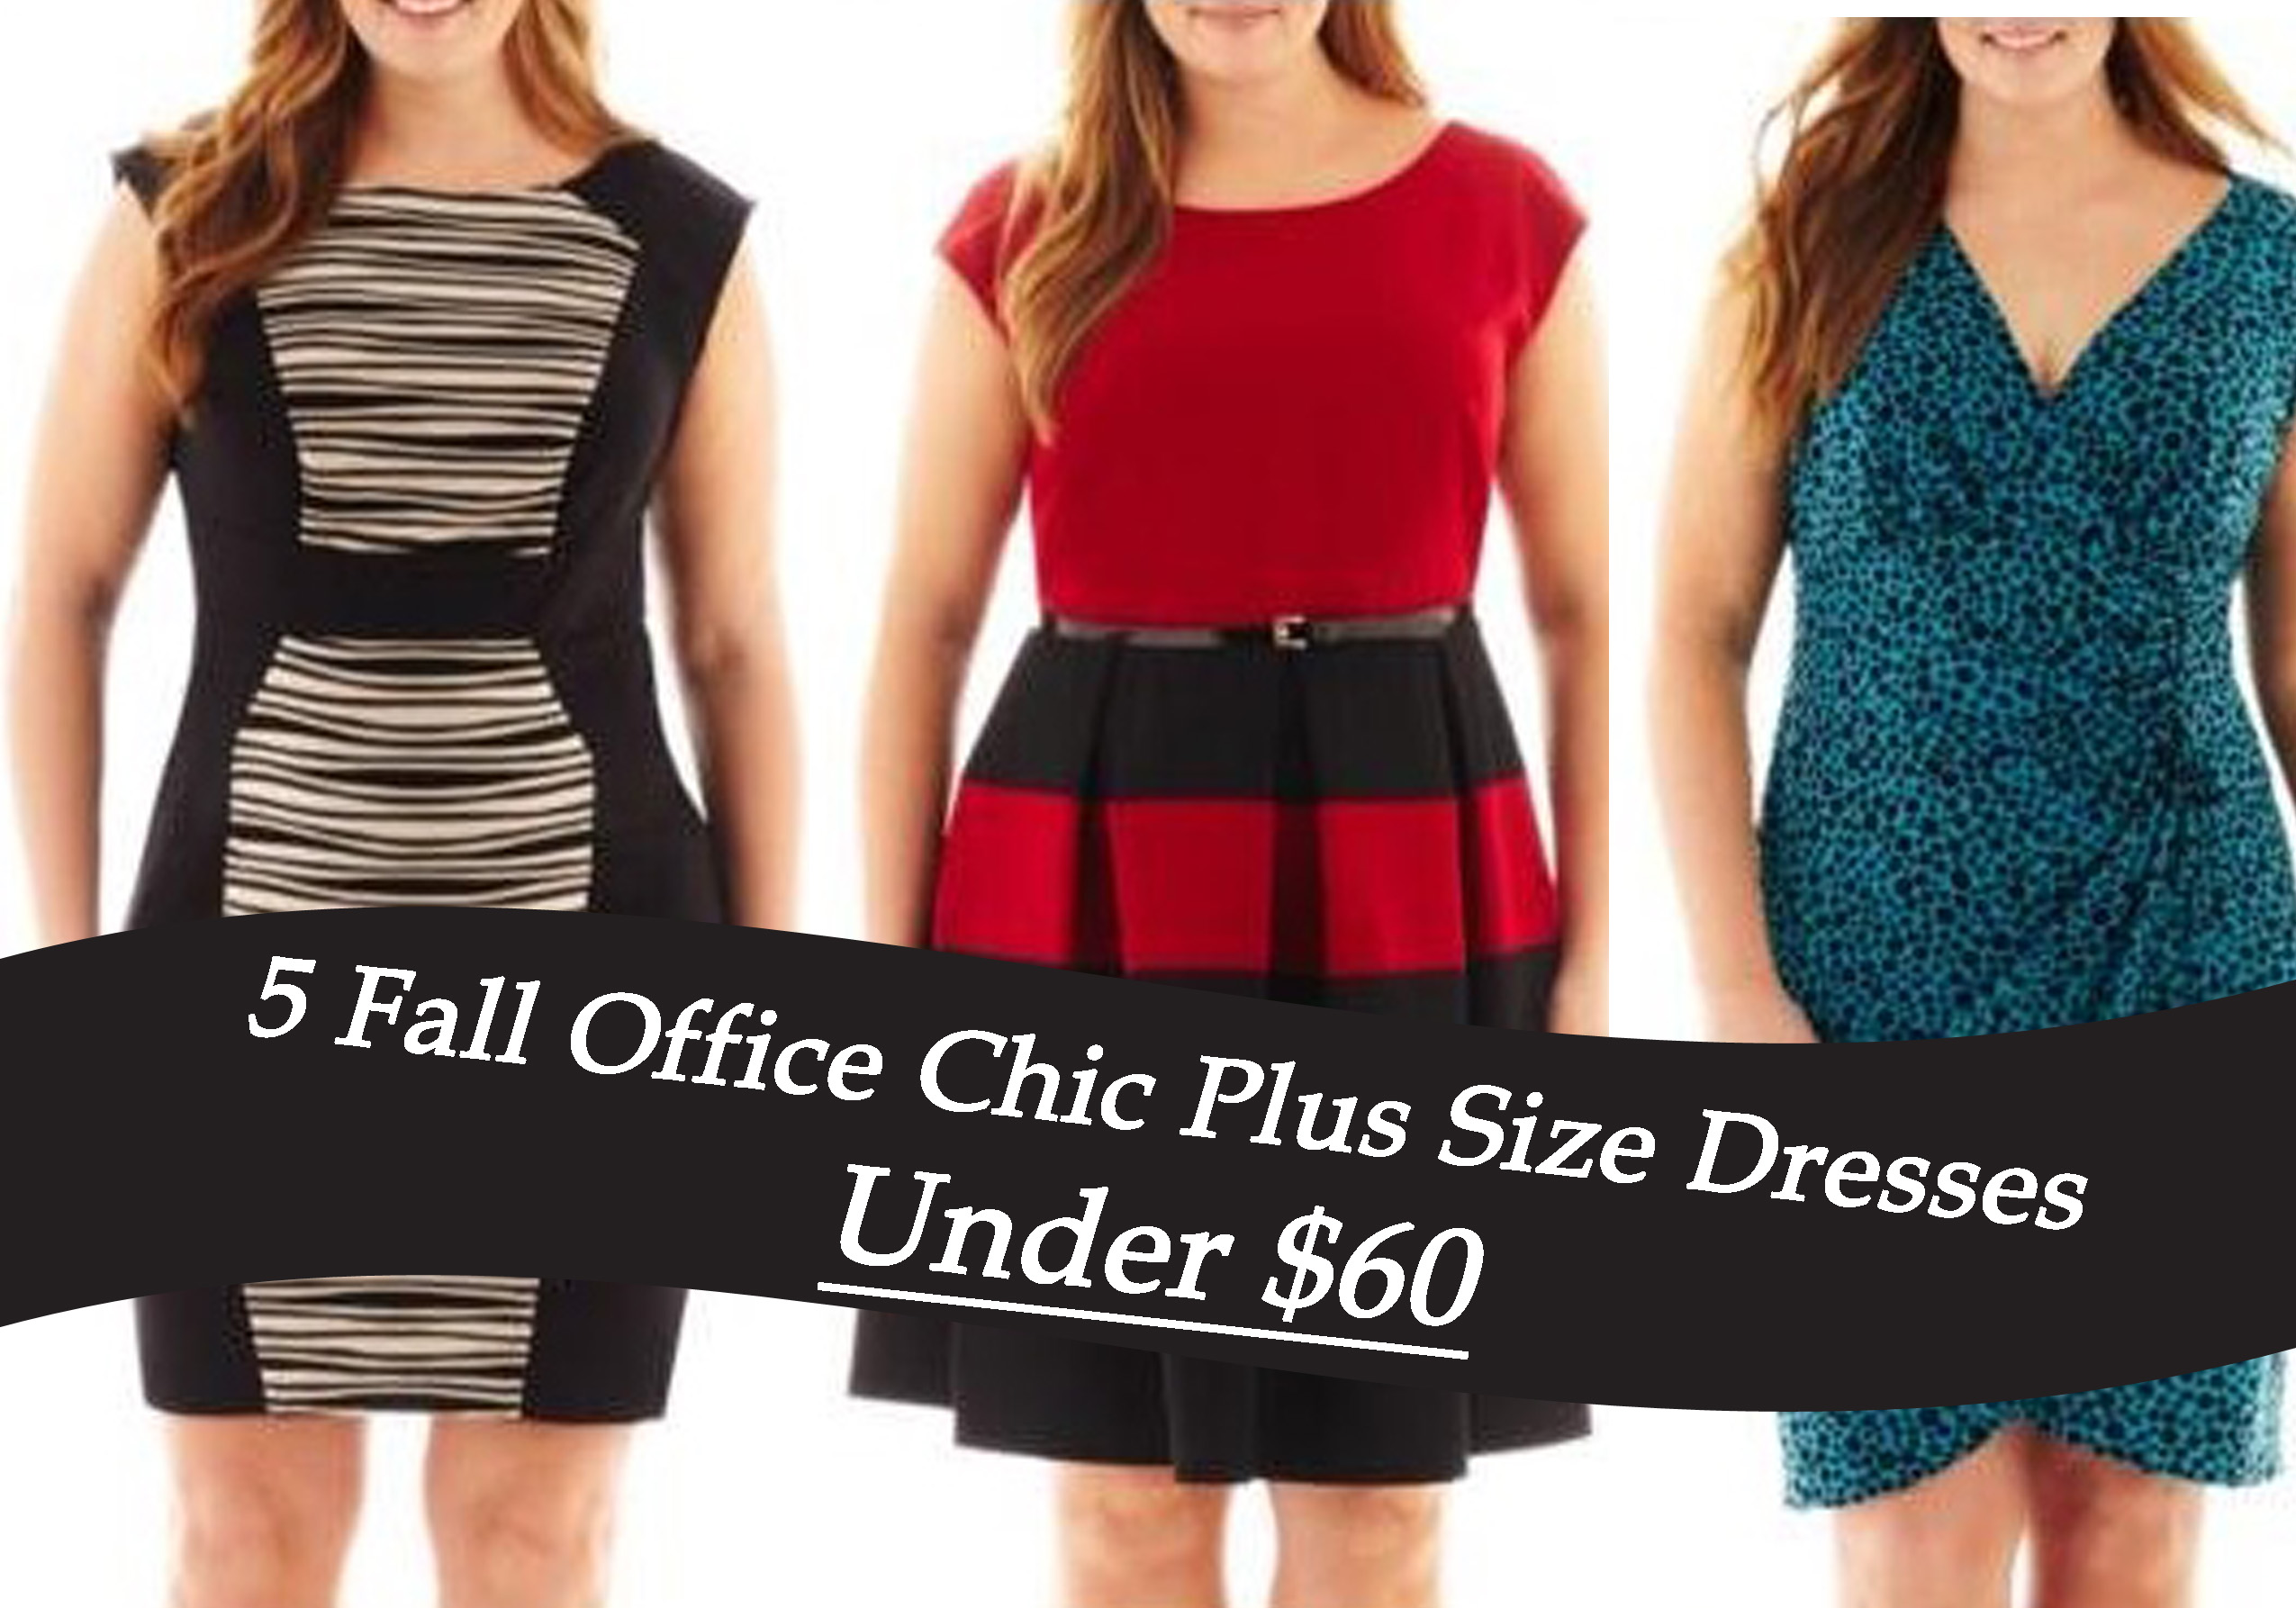 WORK-WEAR WEDNESDAY: 5 FALL OFFICE CHIC PLUS SIZE DRESSES UNDER $60 ...